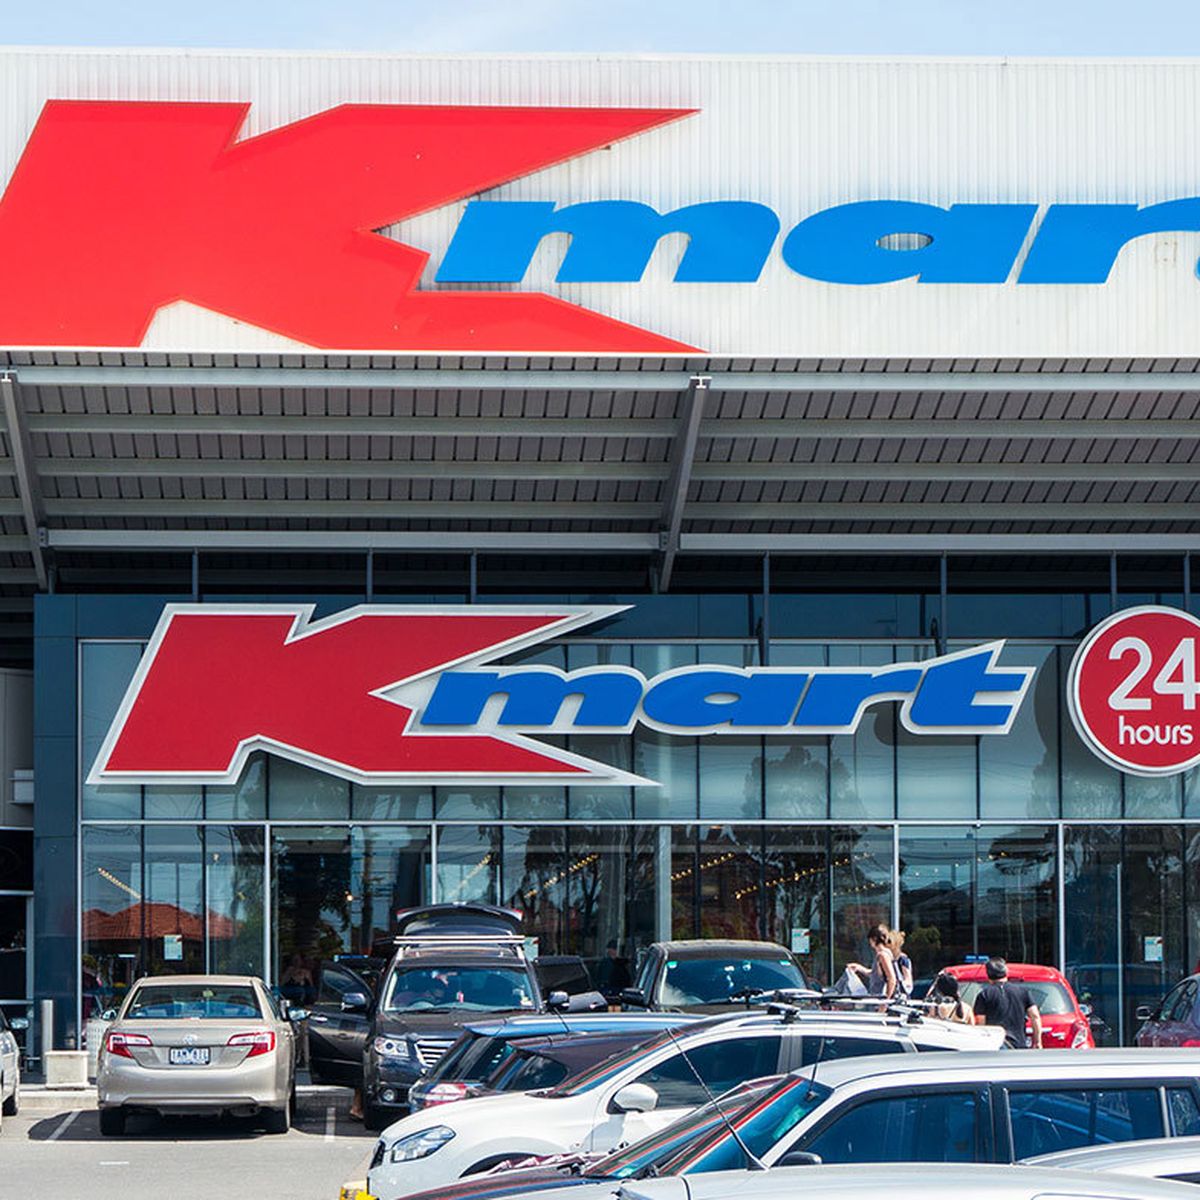 Kmart Australia - Mix and match with our latest range of